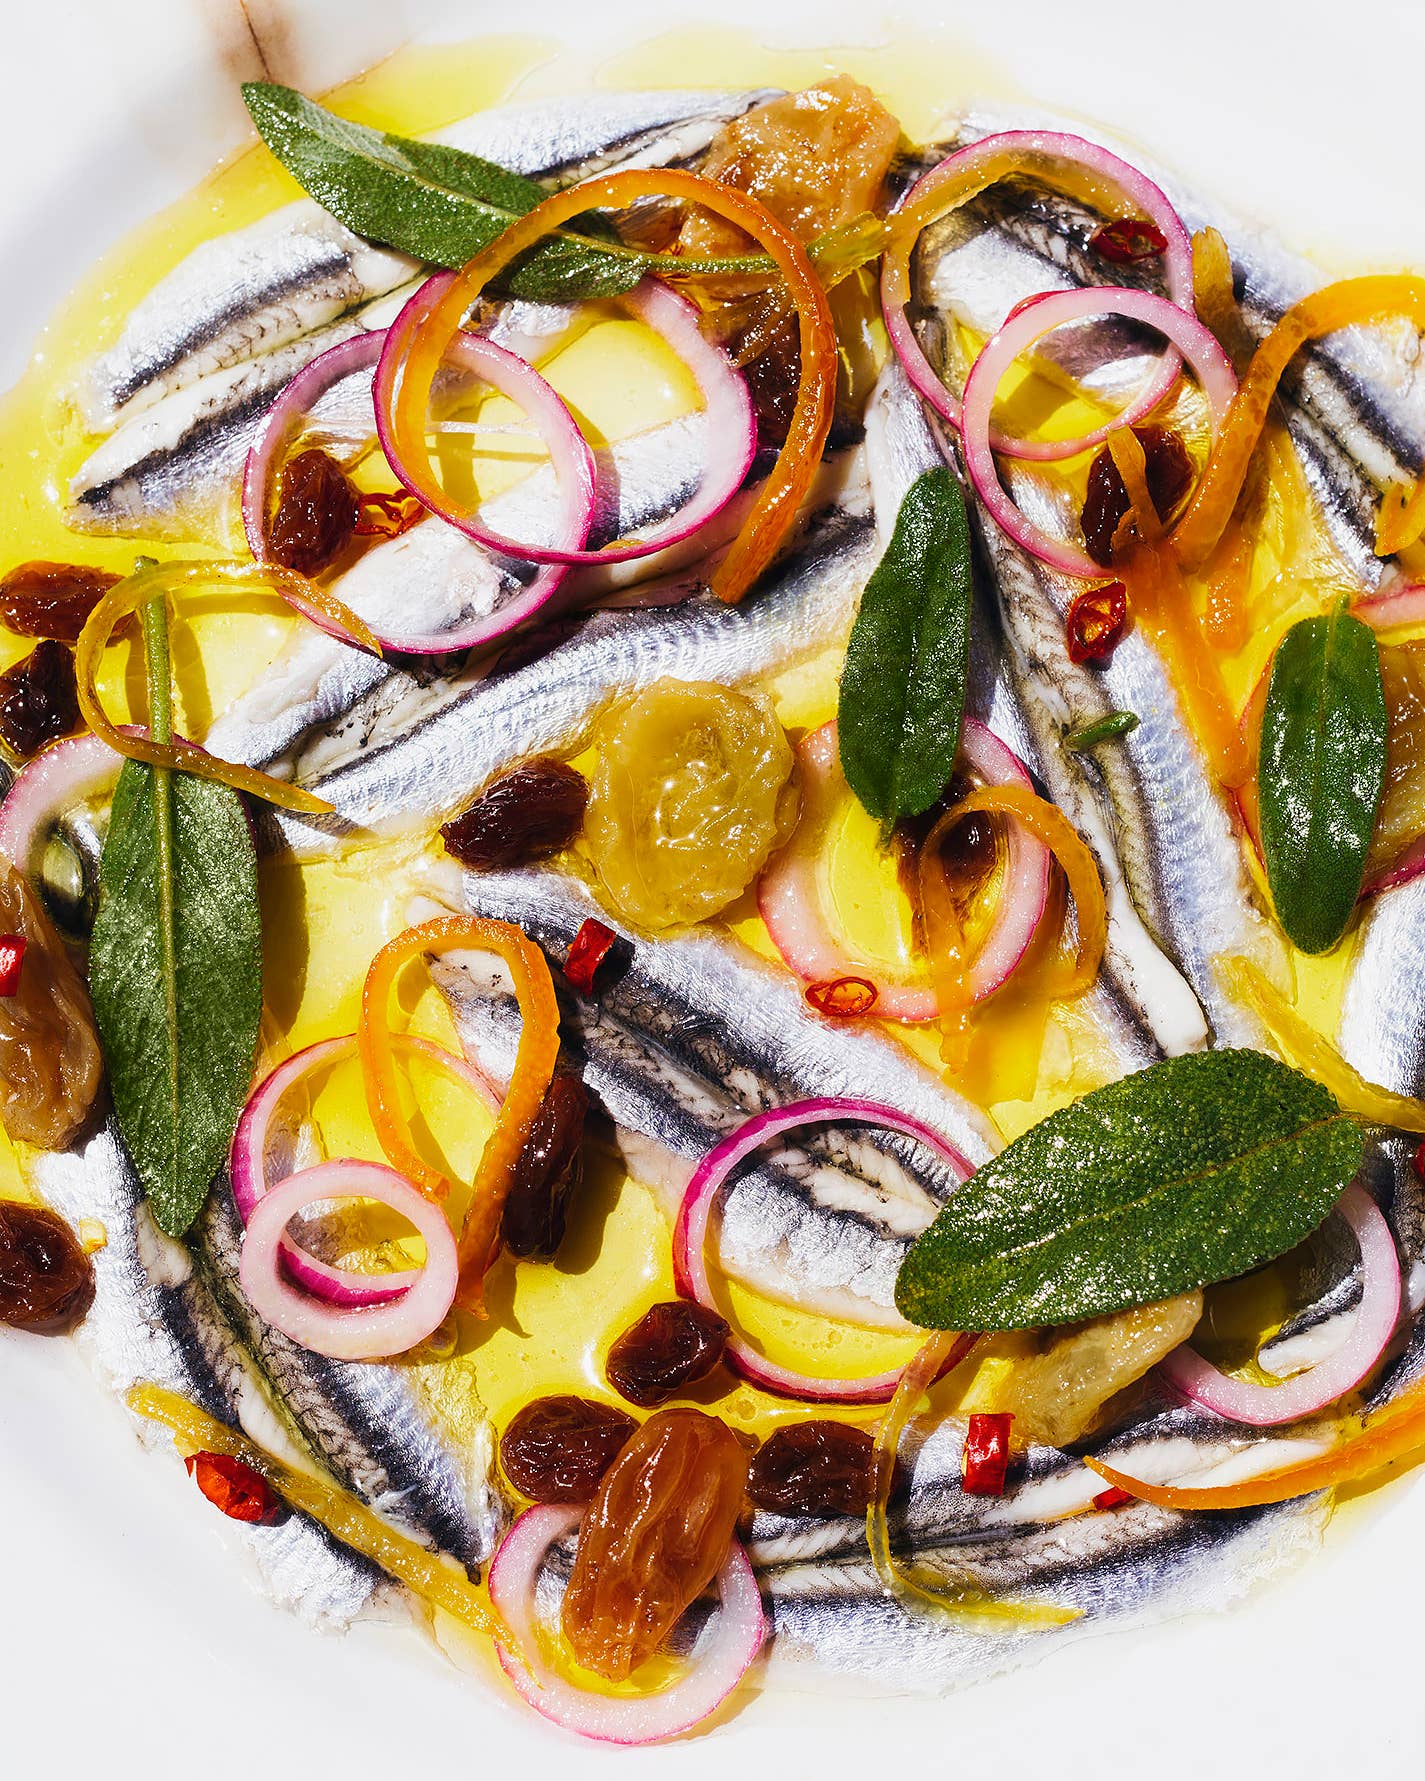 Marinated Anchovies with Candied Citrus, Pickled Raisins, and Chile